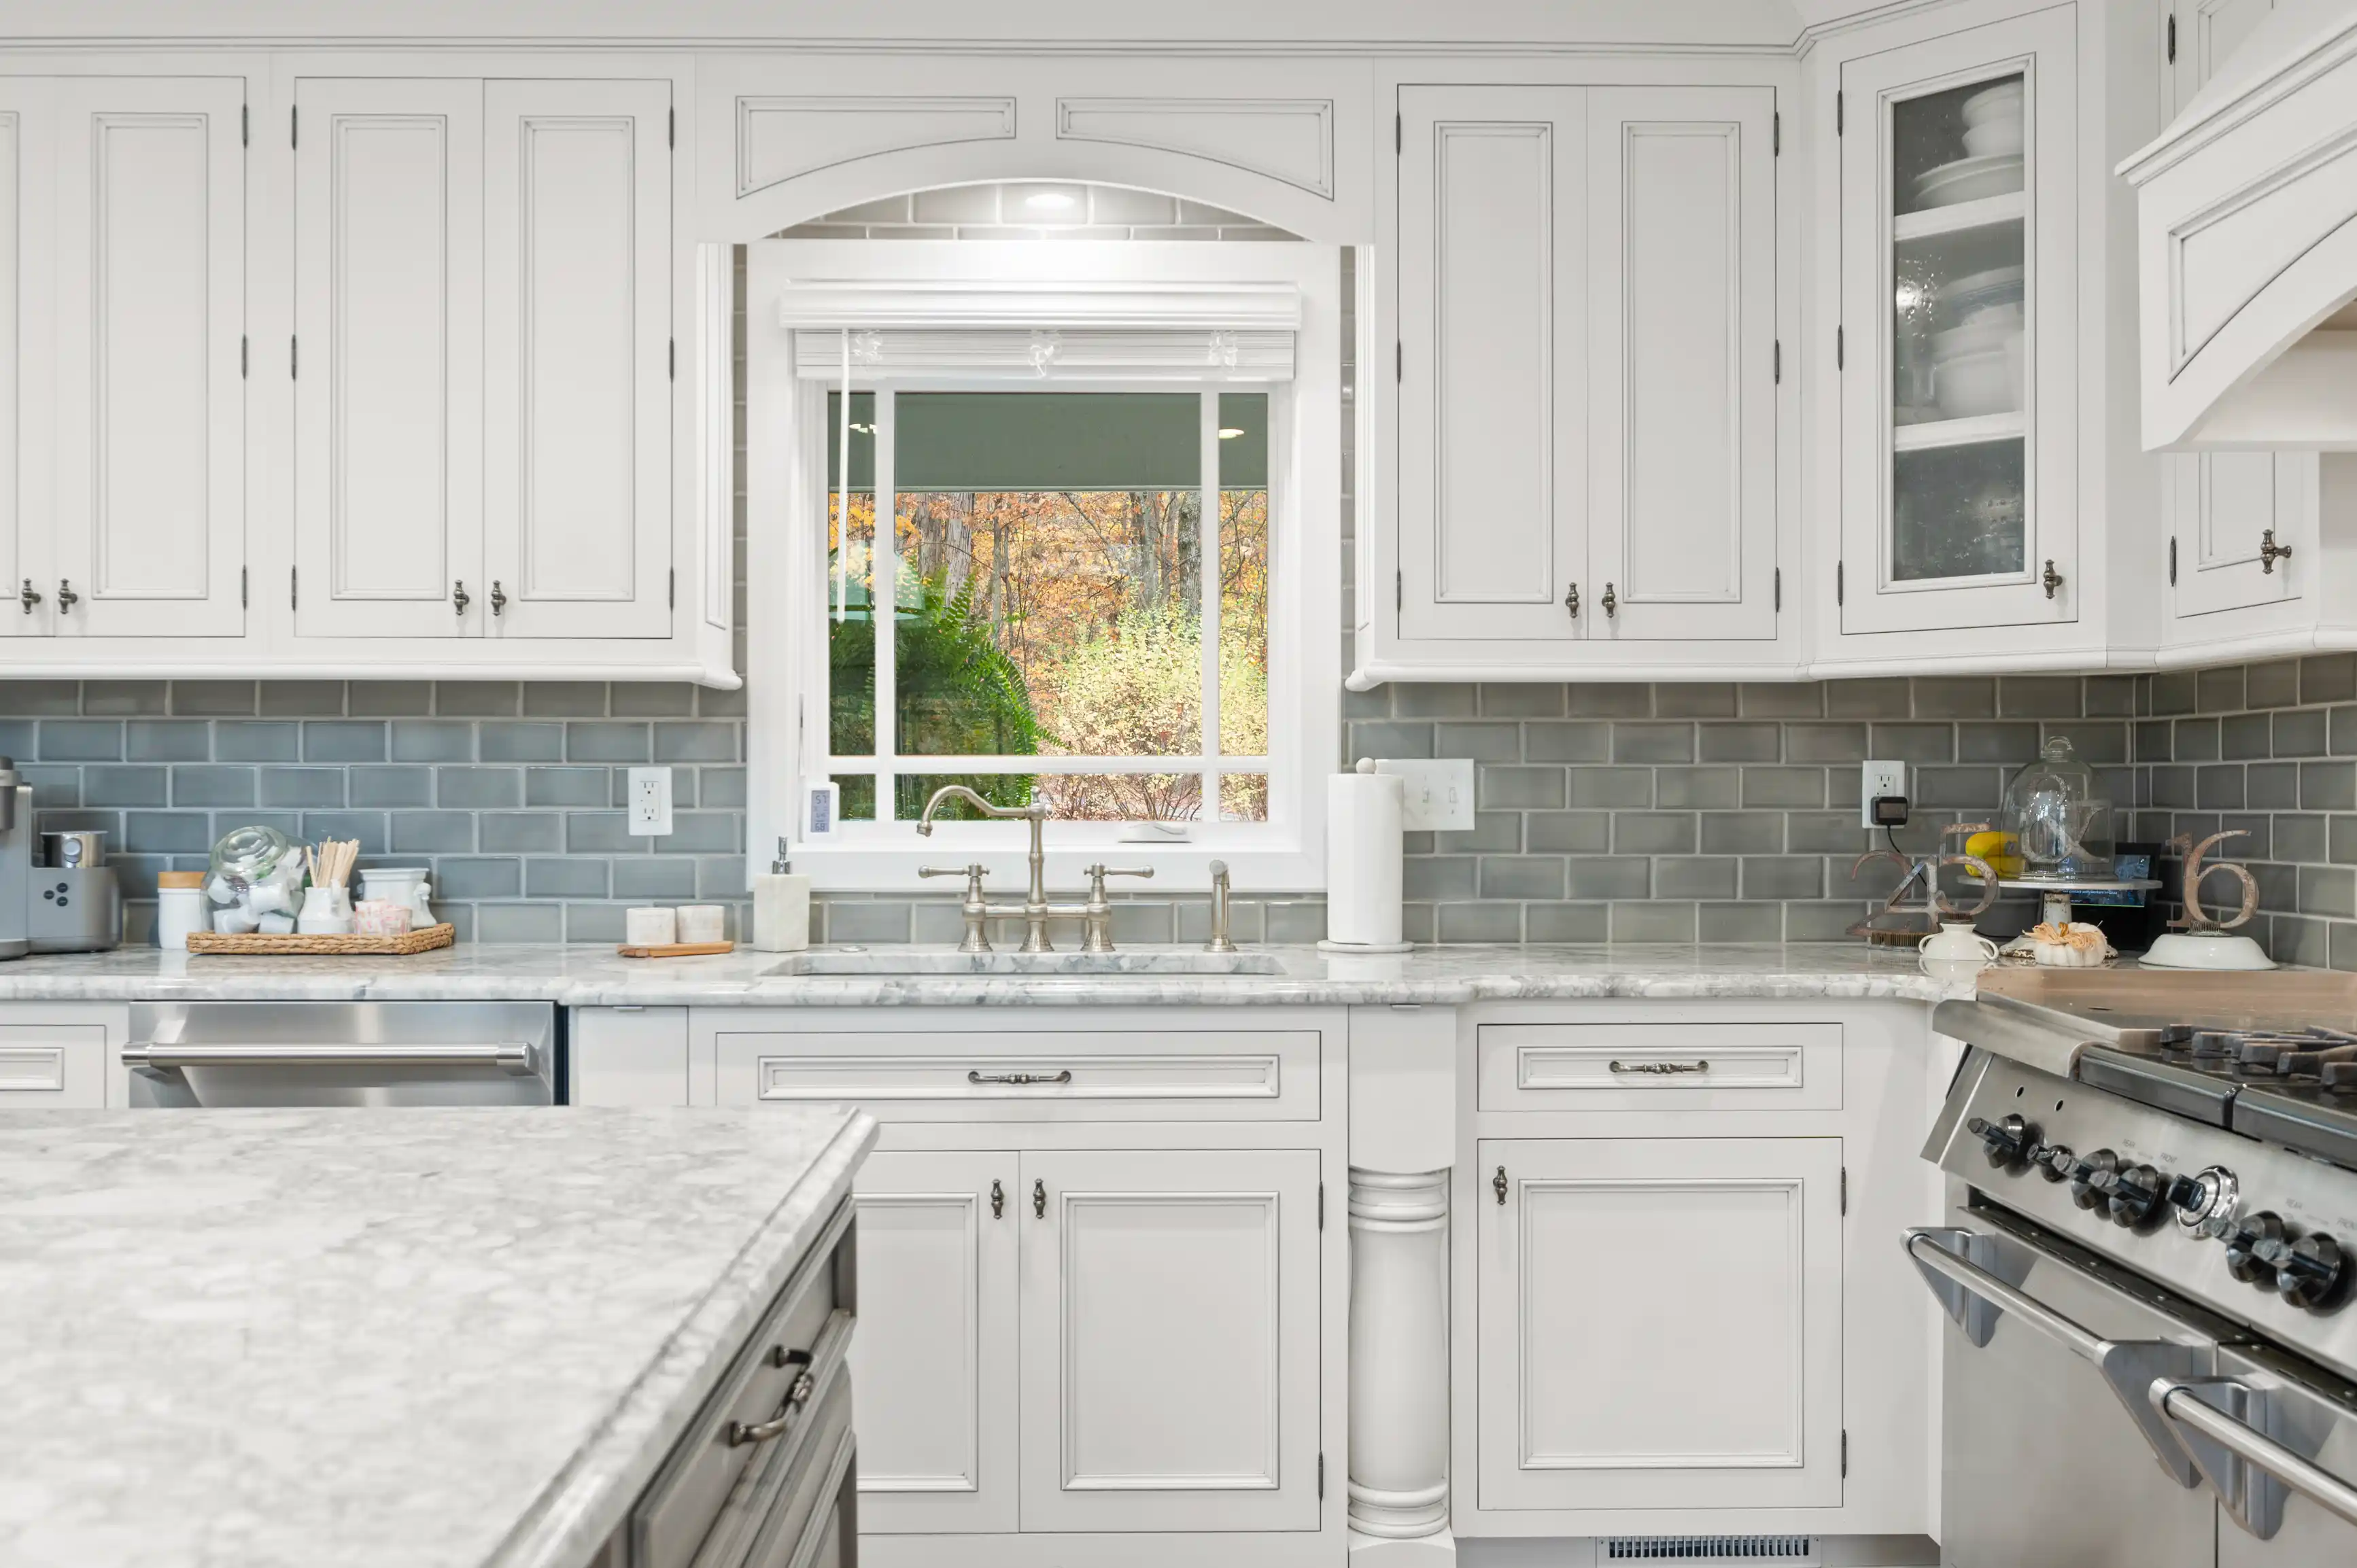 Elegant kitchen interior with white cabinetry, marble countertops, and blue subway tile backsplash, featuring a window with a view of autumn foliage.